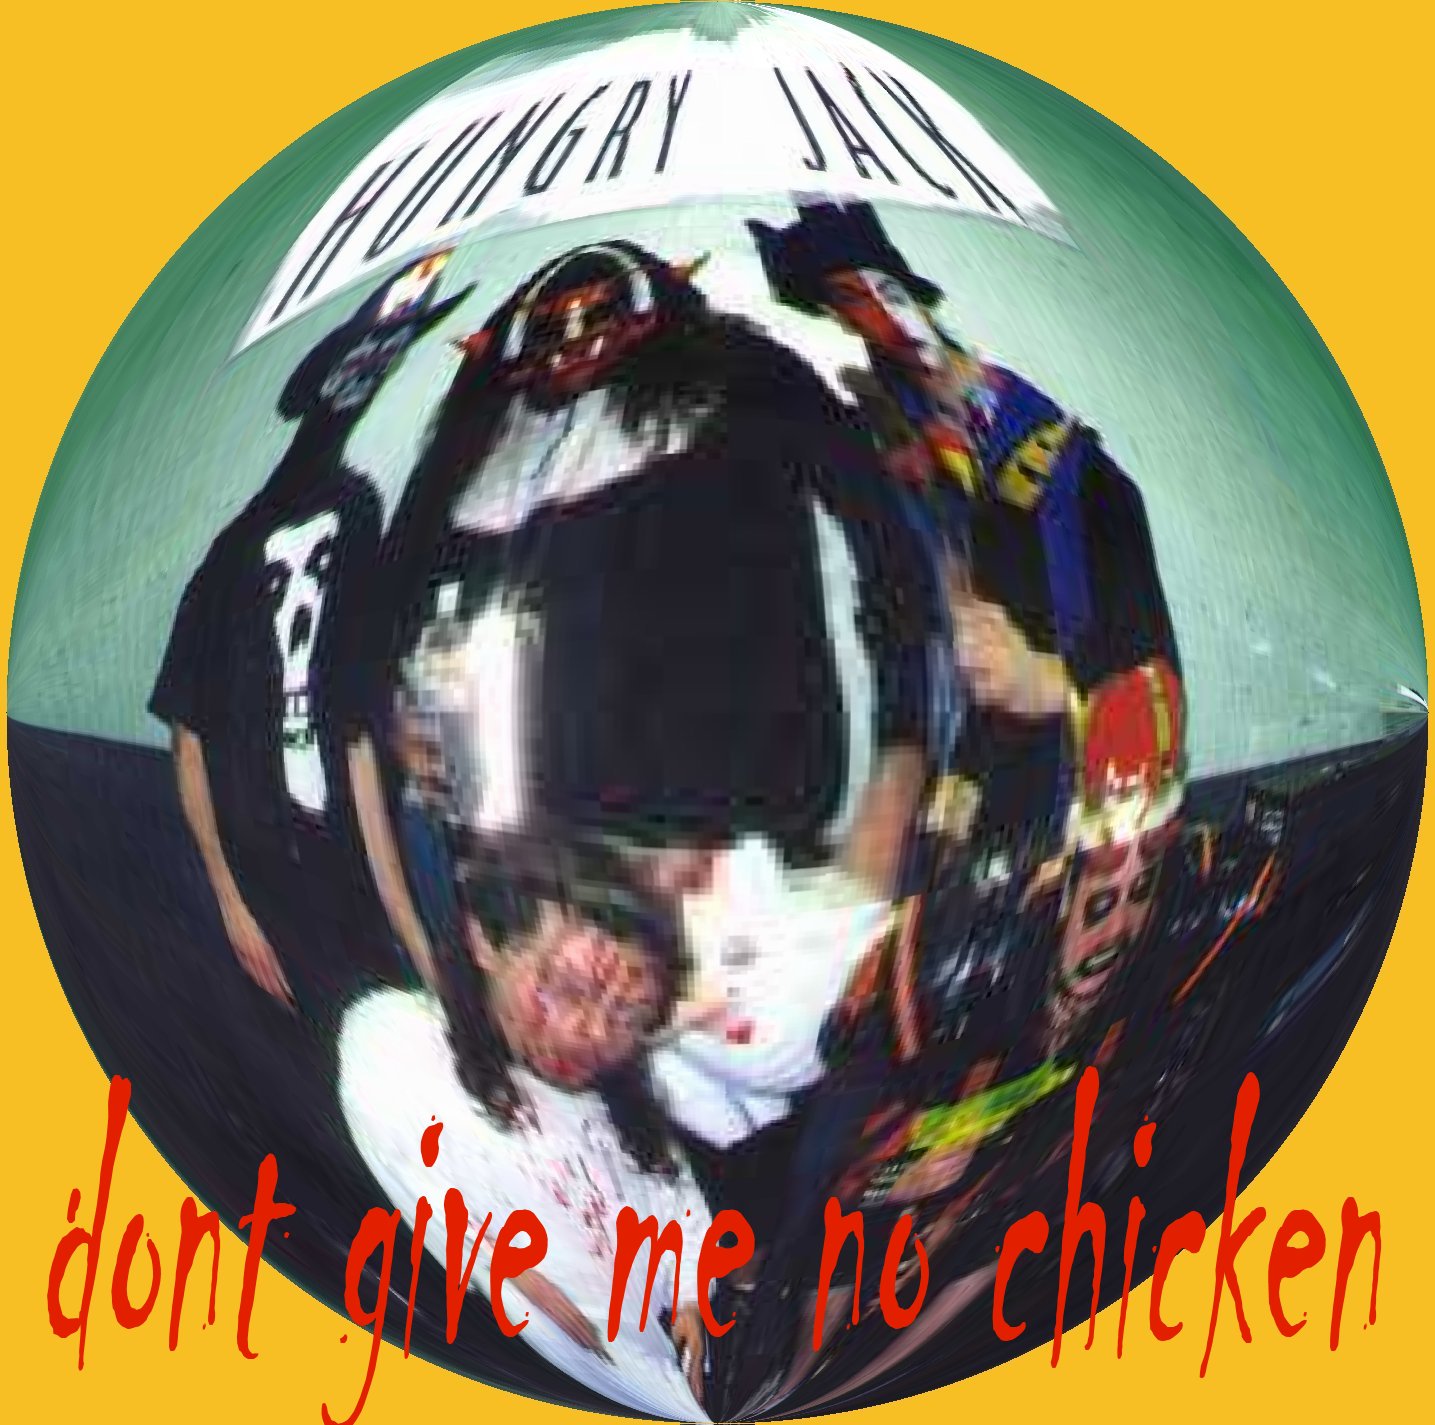 Street cheese records release / dont give me no chicken